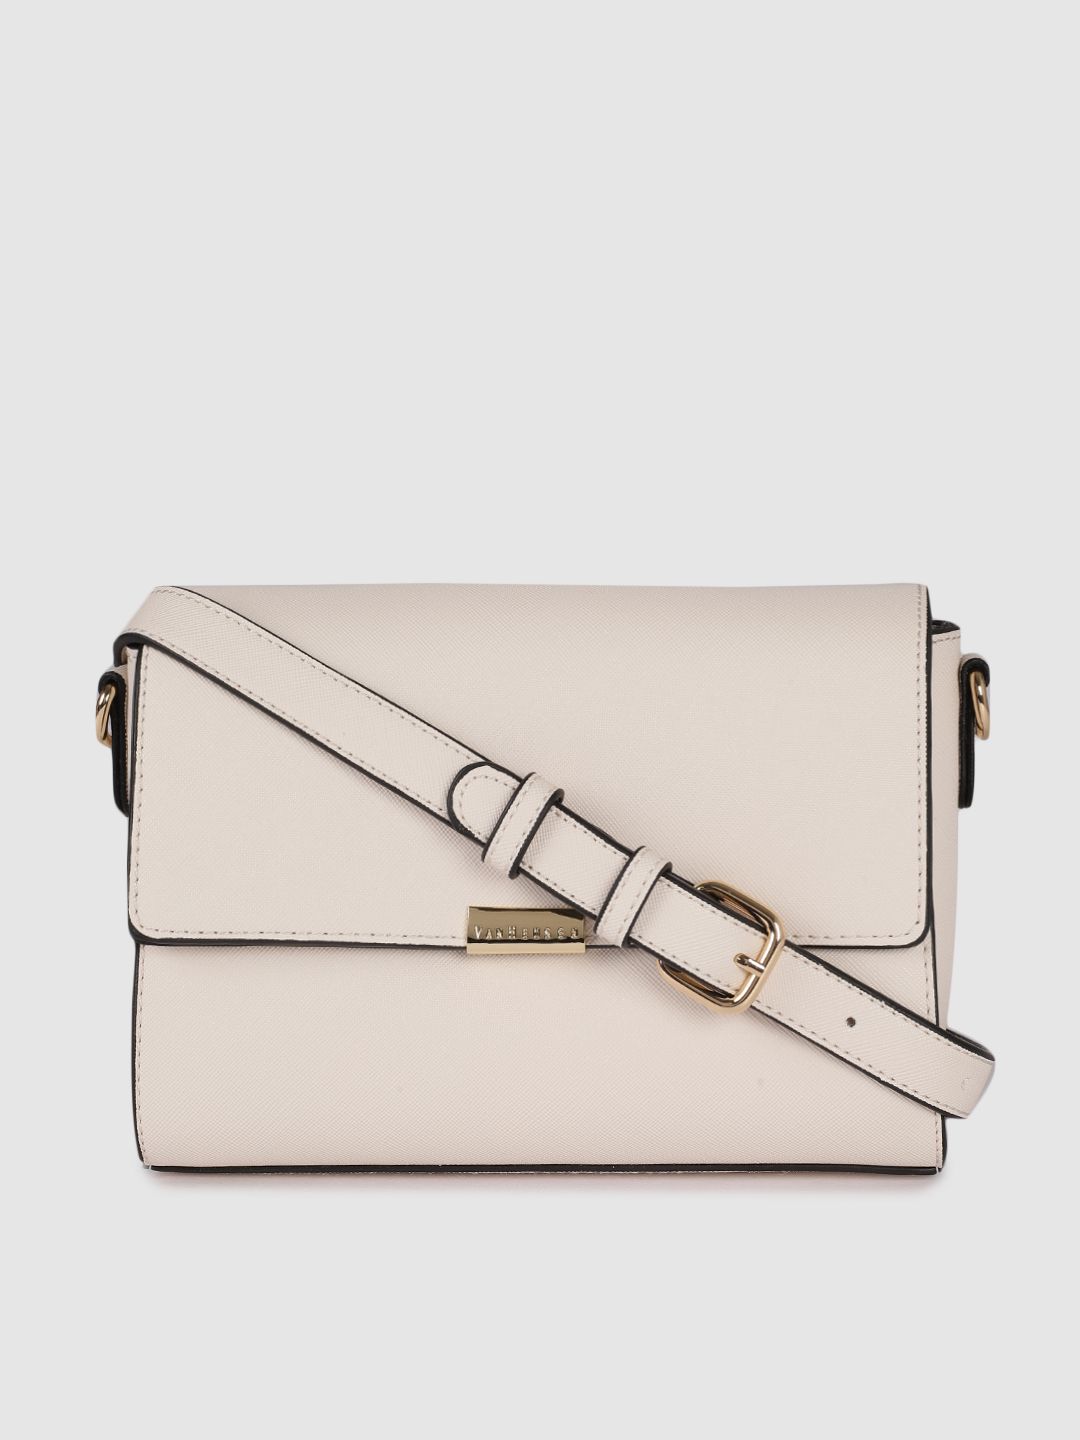 Van Heusen Off-White Structured Sling Bag Price in India